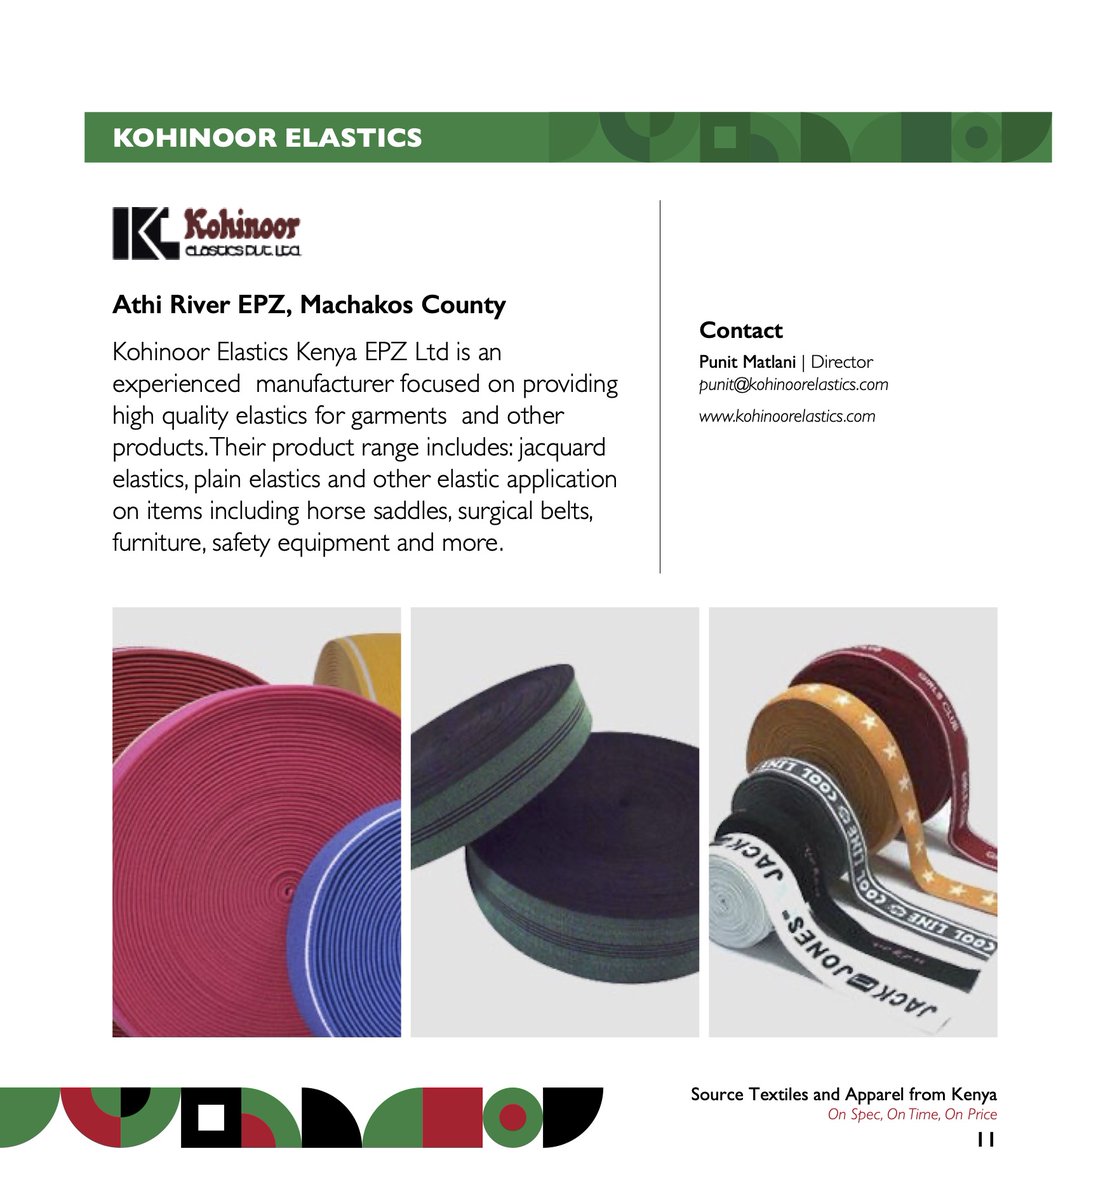 Did You Know? Kohinoor Elastics Kenya EPZ is a company based in Kenya, that has specialized in the manufacturing of elastics for various industries, including apparel, textiles, medical supplies, and more. The company is known for its high-quality elastic products. @USAIDKenya